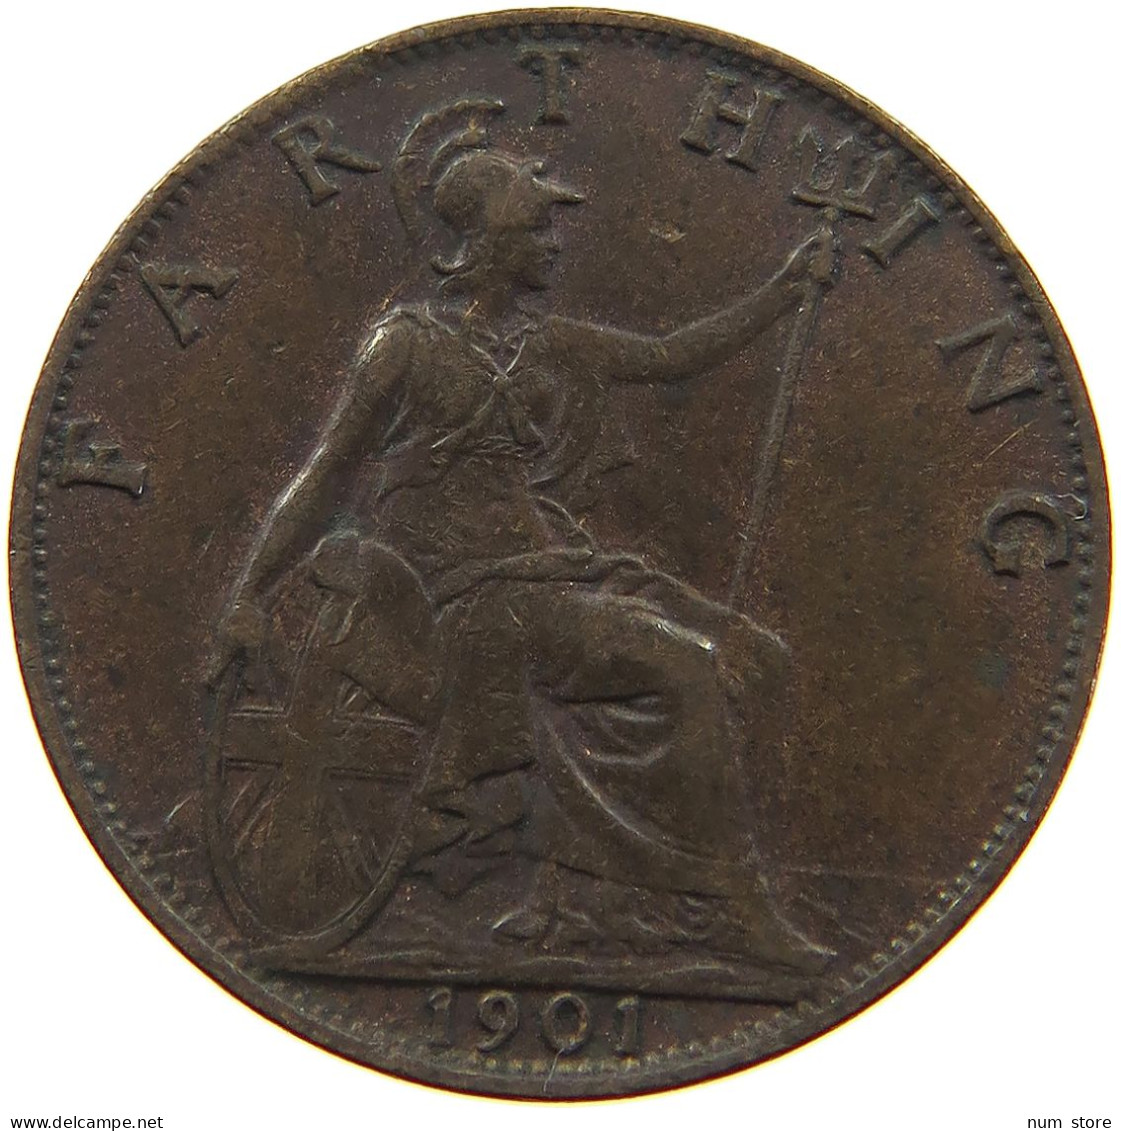 GREAT BRITAIN FARTHING 1901 Victoria 1837-1901 #a011 0985 - B. 1 Farthing